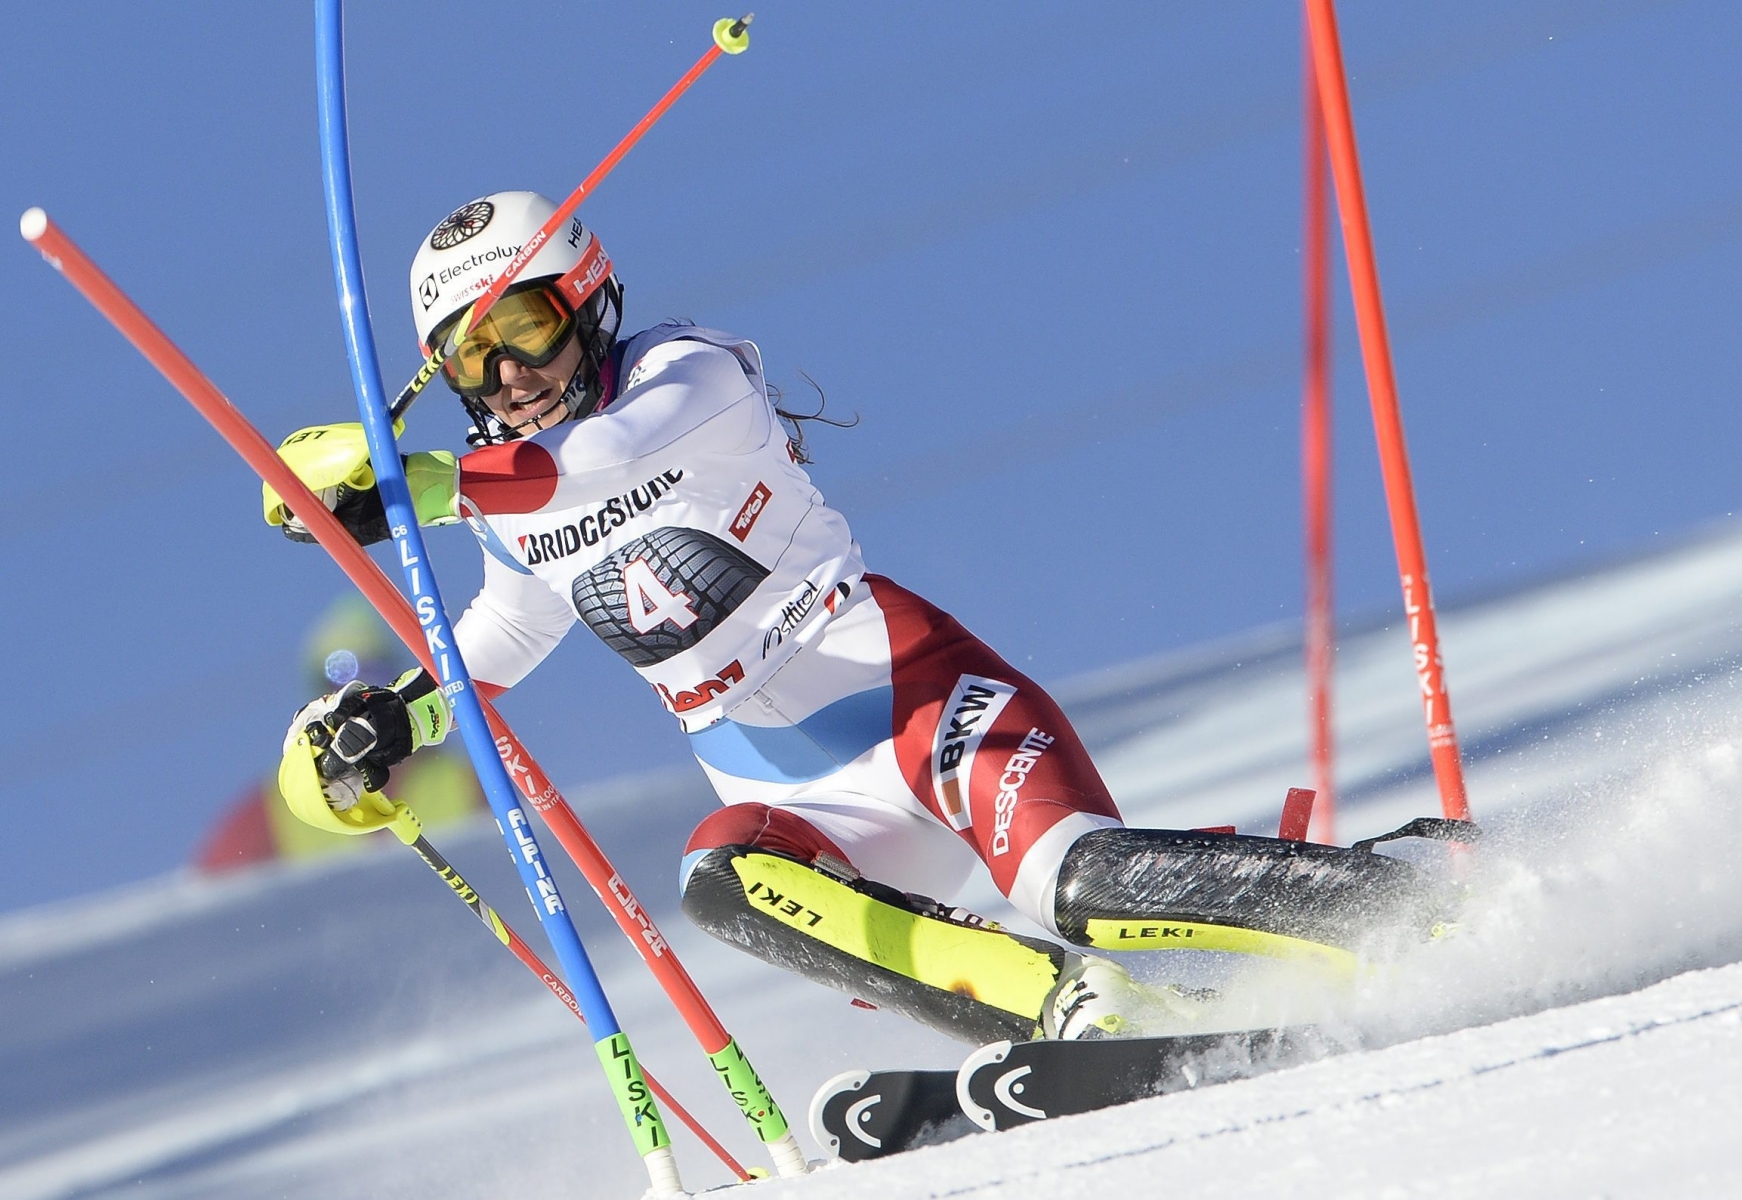 epa05082917 Swiss Wendy Holdener clears a gate during the first run of the Women's Slalom race at the FIS Alpine Skiing World Cup in Lienz, Austria, 29 December 2015.  EPA/ROBERT JAEGER AUSTRIA ALPINE SKIING WORLD CUP